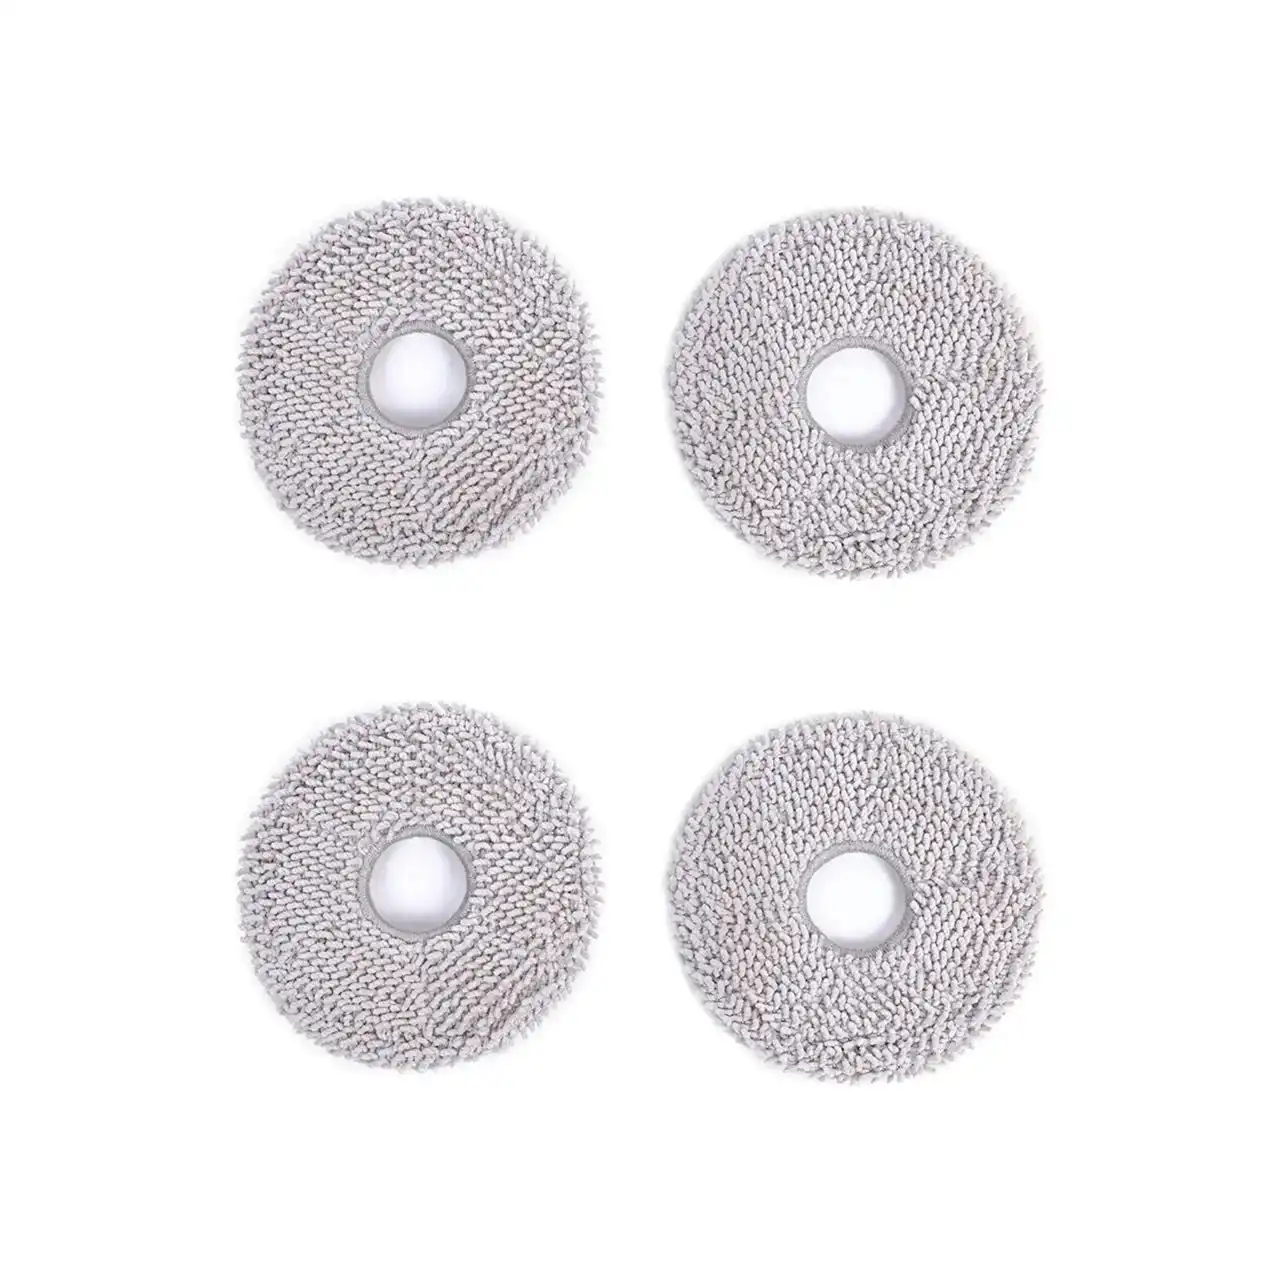 Ecovacs Deebot X1/x2/t20 Washable Mopping Pads (non-oem)